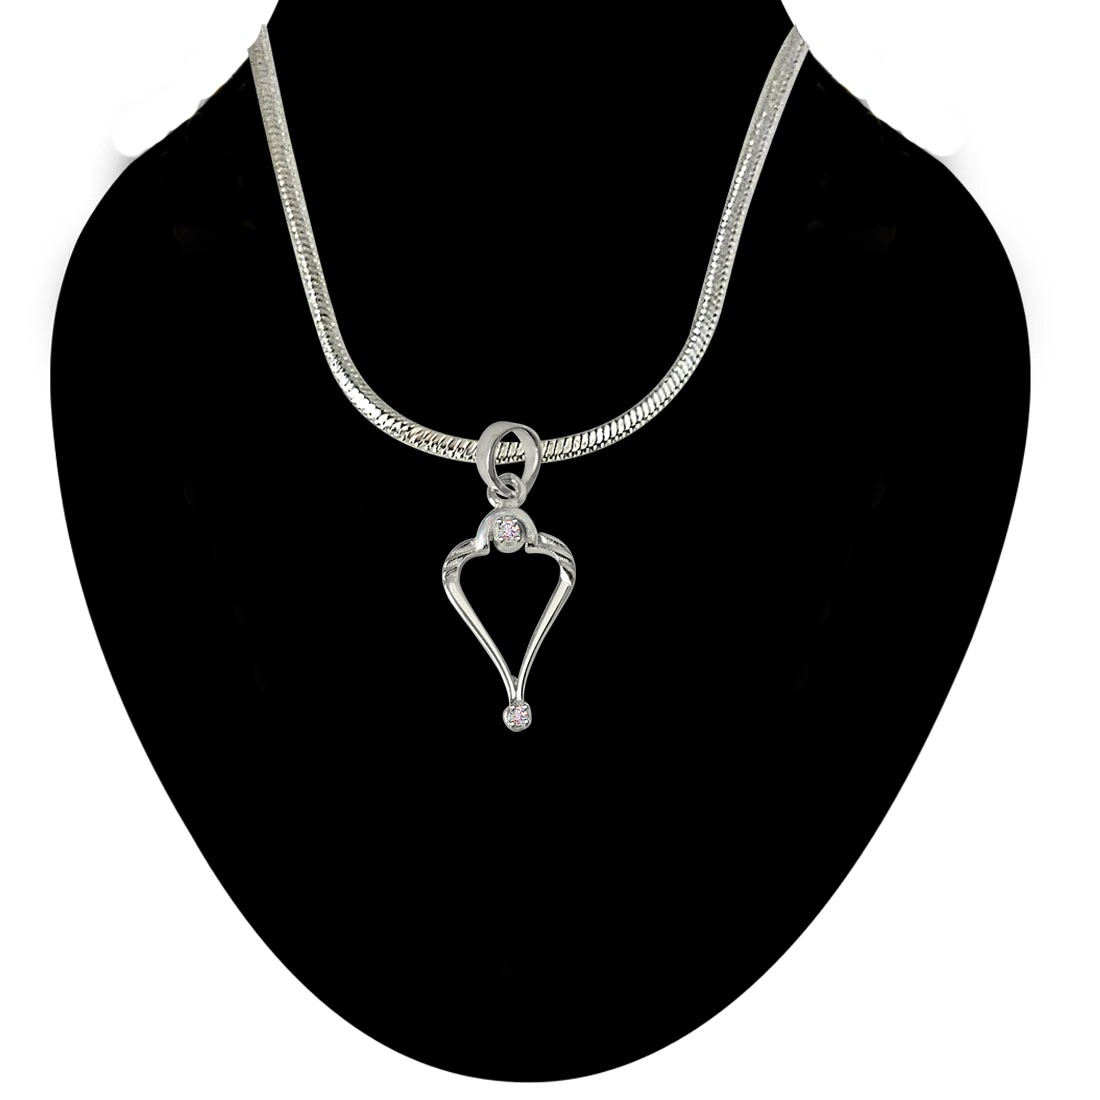 Rise with Grace - Real Diamond & Sterling Silver Pendant with 18 IN Chain (SDP218)